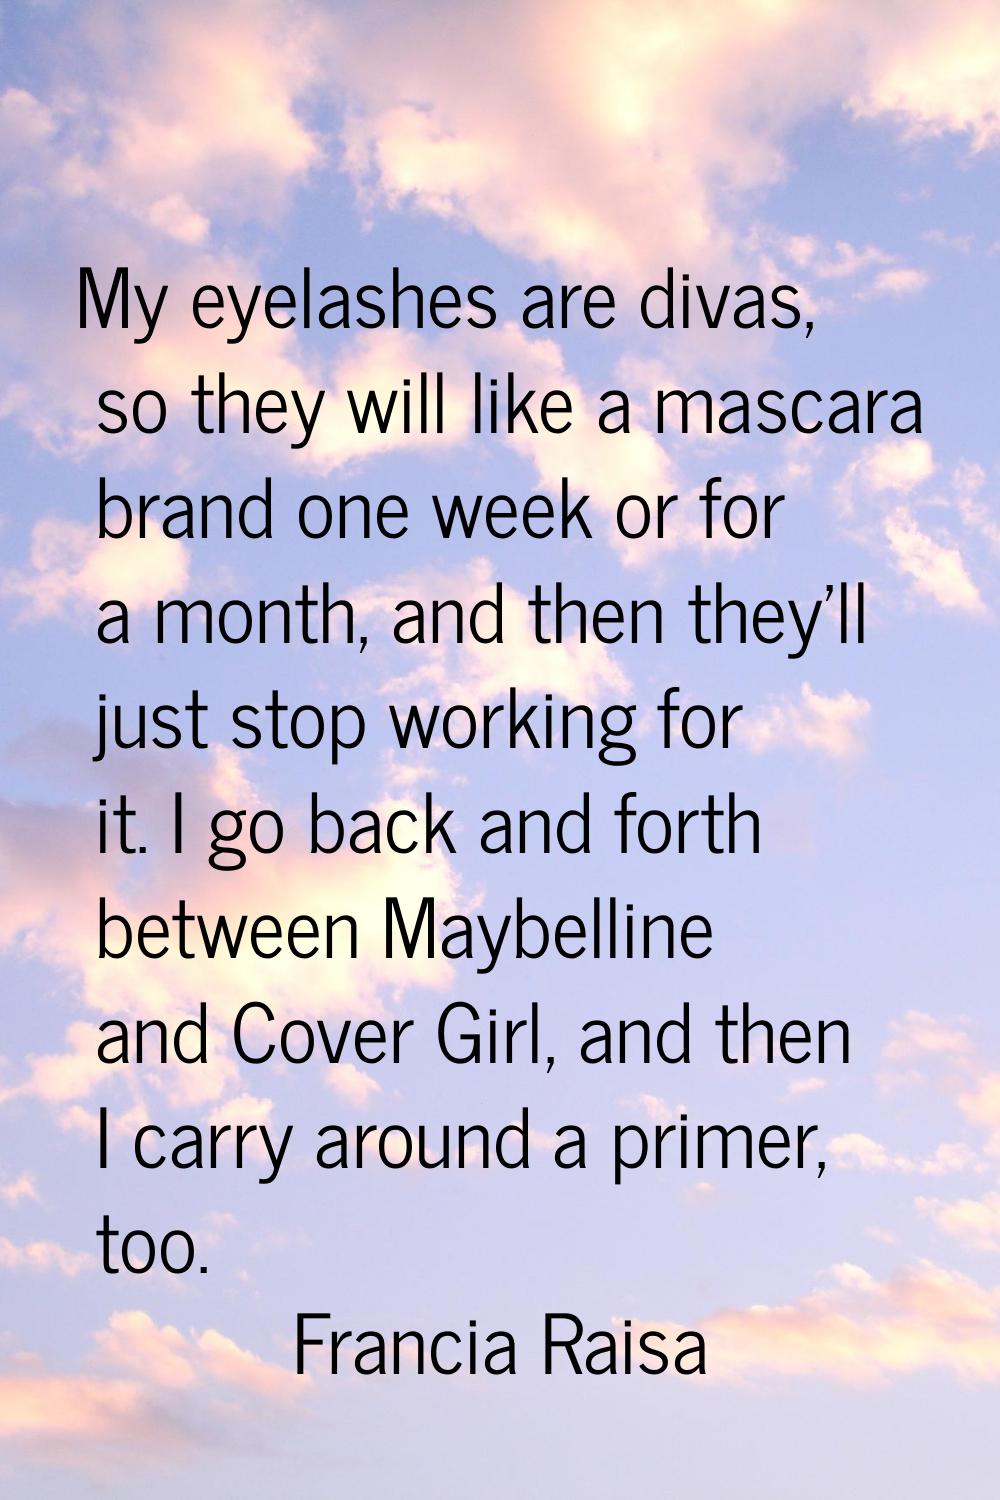 My eyelashes are divas, so they will like a mascara brand one week or for a month, and then they'll